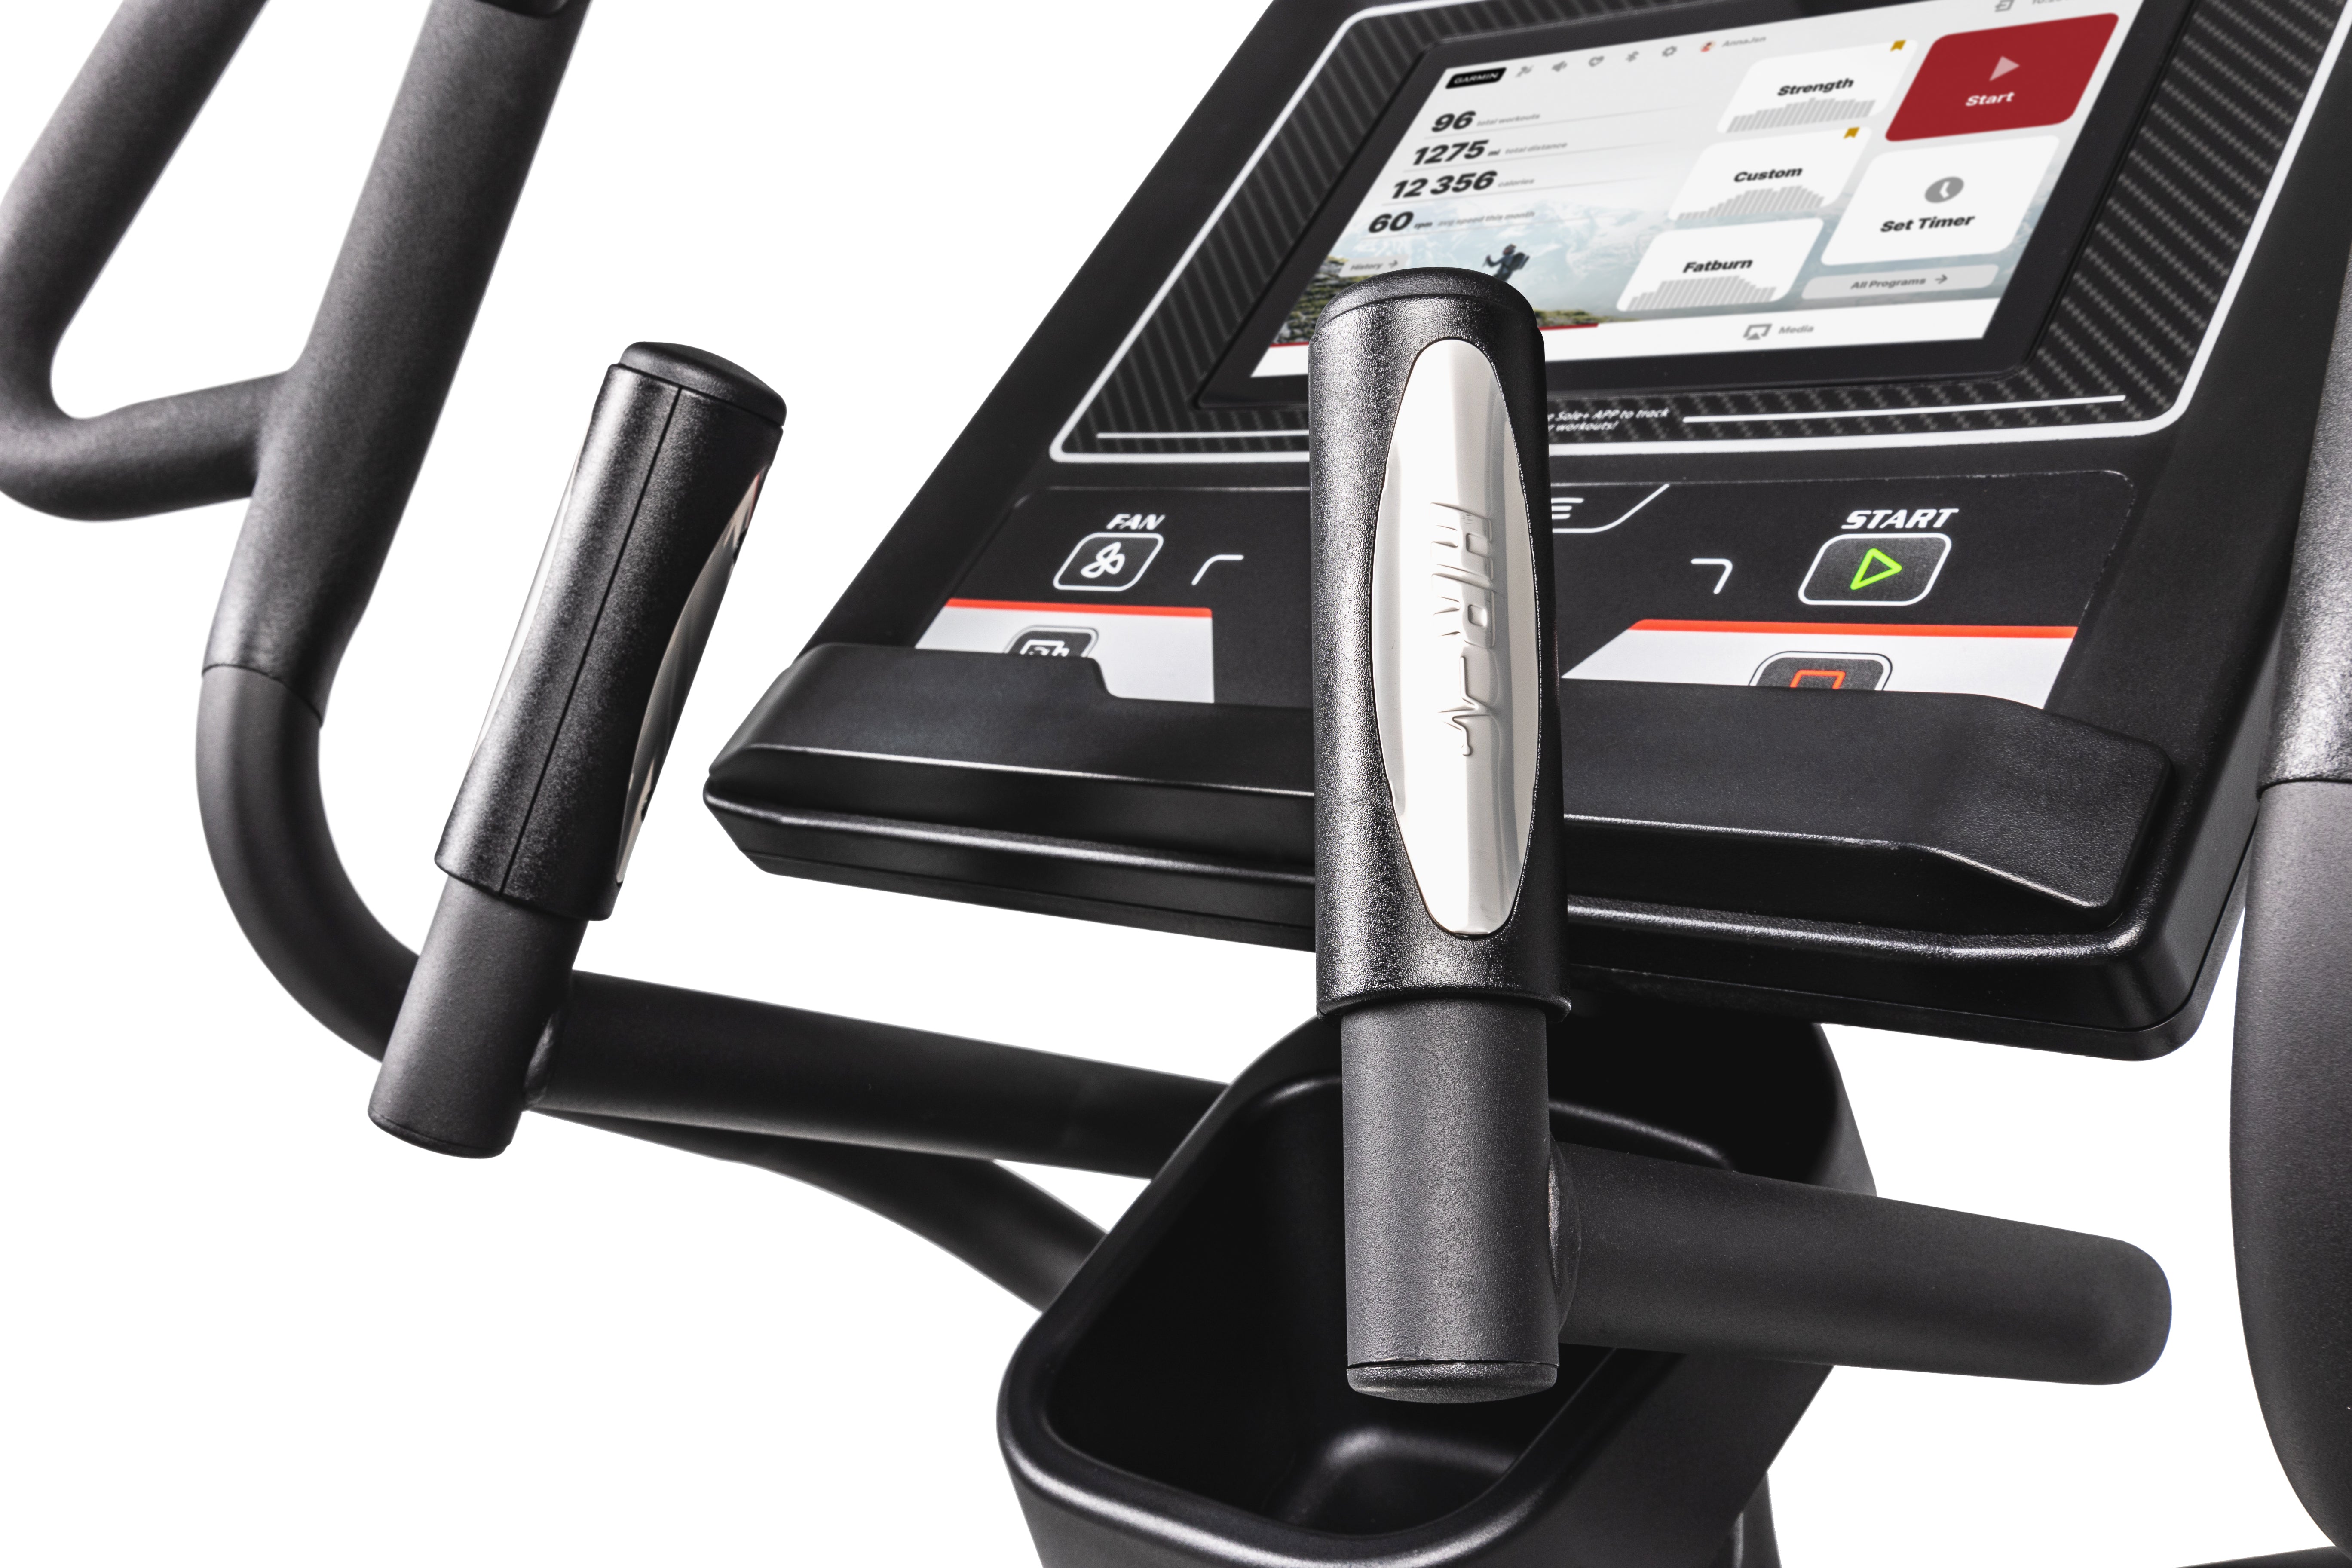 Detailed view of the Sole E35 elliptical machine's central console and handlebars. The console features a digital display showing workout metrics like distance, heart rate, and time. Below the screen are tactile buttons labeled with various controls, including start and stop. The handlebars, with padded grips, frame the console, and one handle showcases a silver Sole logo. The bottom of the frame also reveals a black storage tray.